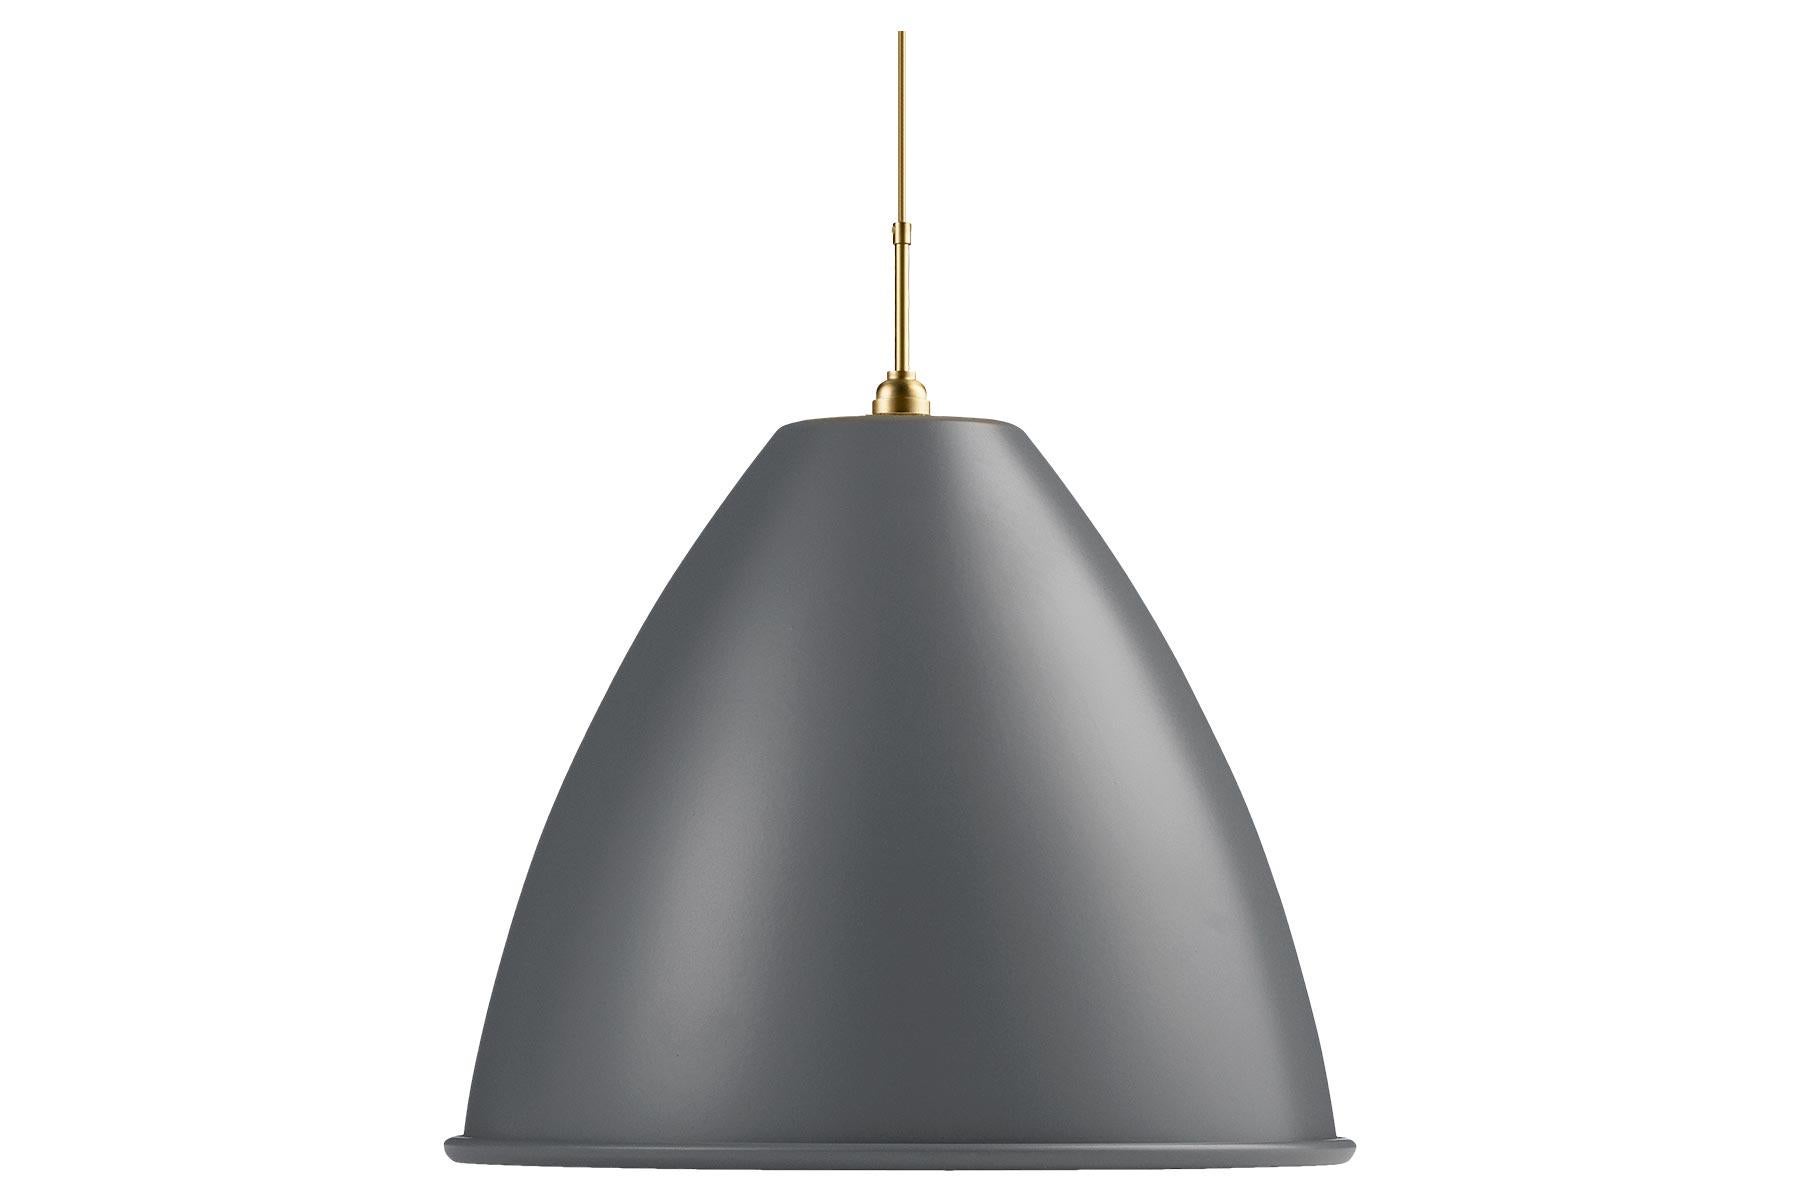 
The Bestlite BL9 Pendant in four sizes and in a numerous of finishes was designed in 1930 by the Bauhaus influenced British designer Robert Dudley Best. With its great heritage and contemporary look, the BL9 Pendant is a coveted design worldwide.